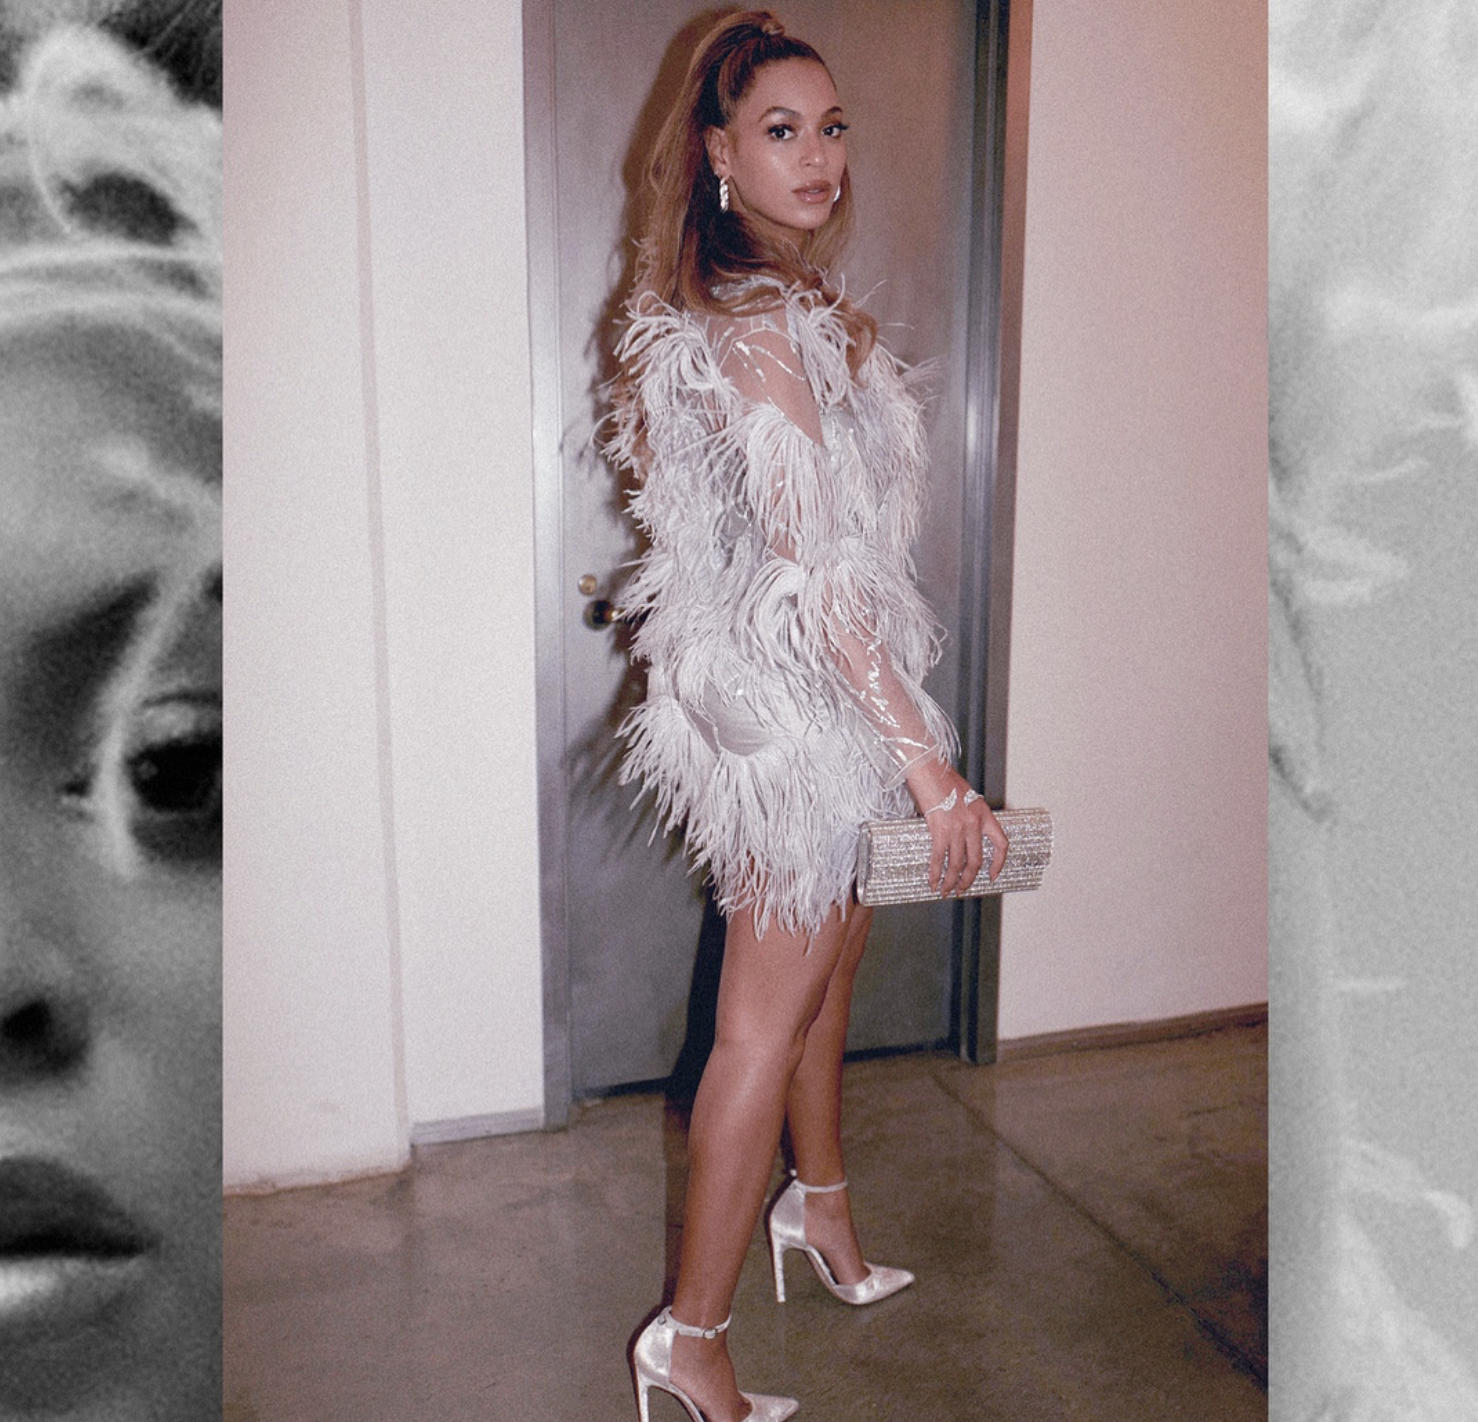 Beyonce's Best Style Moments - 100+ Best Beyoncé Knowles Fashion